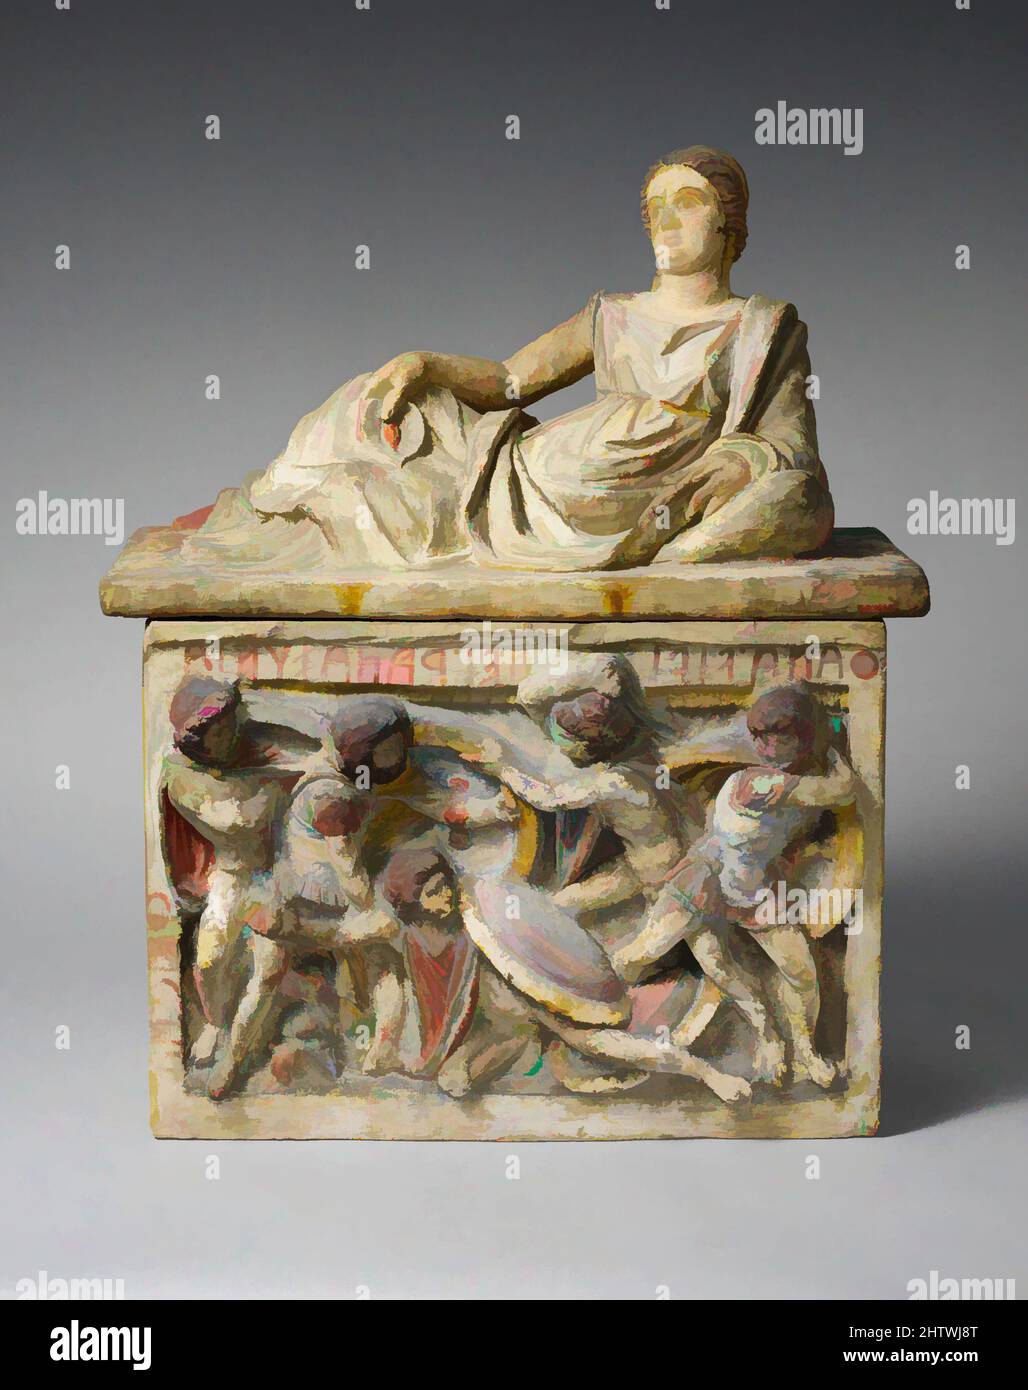 Art inspired by Terracotta cinerary urn, Hellenistic, 2nd century B.C., Etruscan, Terracotta, Height: 28 1/4 in. (71.8 cm), Terracottas, The inscription, THANA : VIPINEI : RANAZUNIA : CREICESA, attests that this is the ash urn of Thana Vipinei Ranazunia, wife of Creice. The last word, Classic works modernized by Artotop with a splash of modernity. Shapes, color and value, eye-catching visual impact on art. Emotions through freedom of artworks in a contemporary way. A timeless message pursuing a wildly creative new direction. Artists turning to the digital medium and creating the Artotop NFT Stock Photo